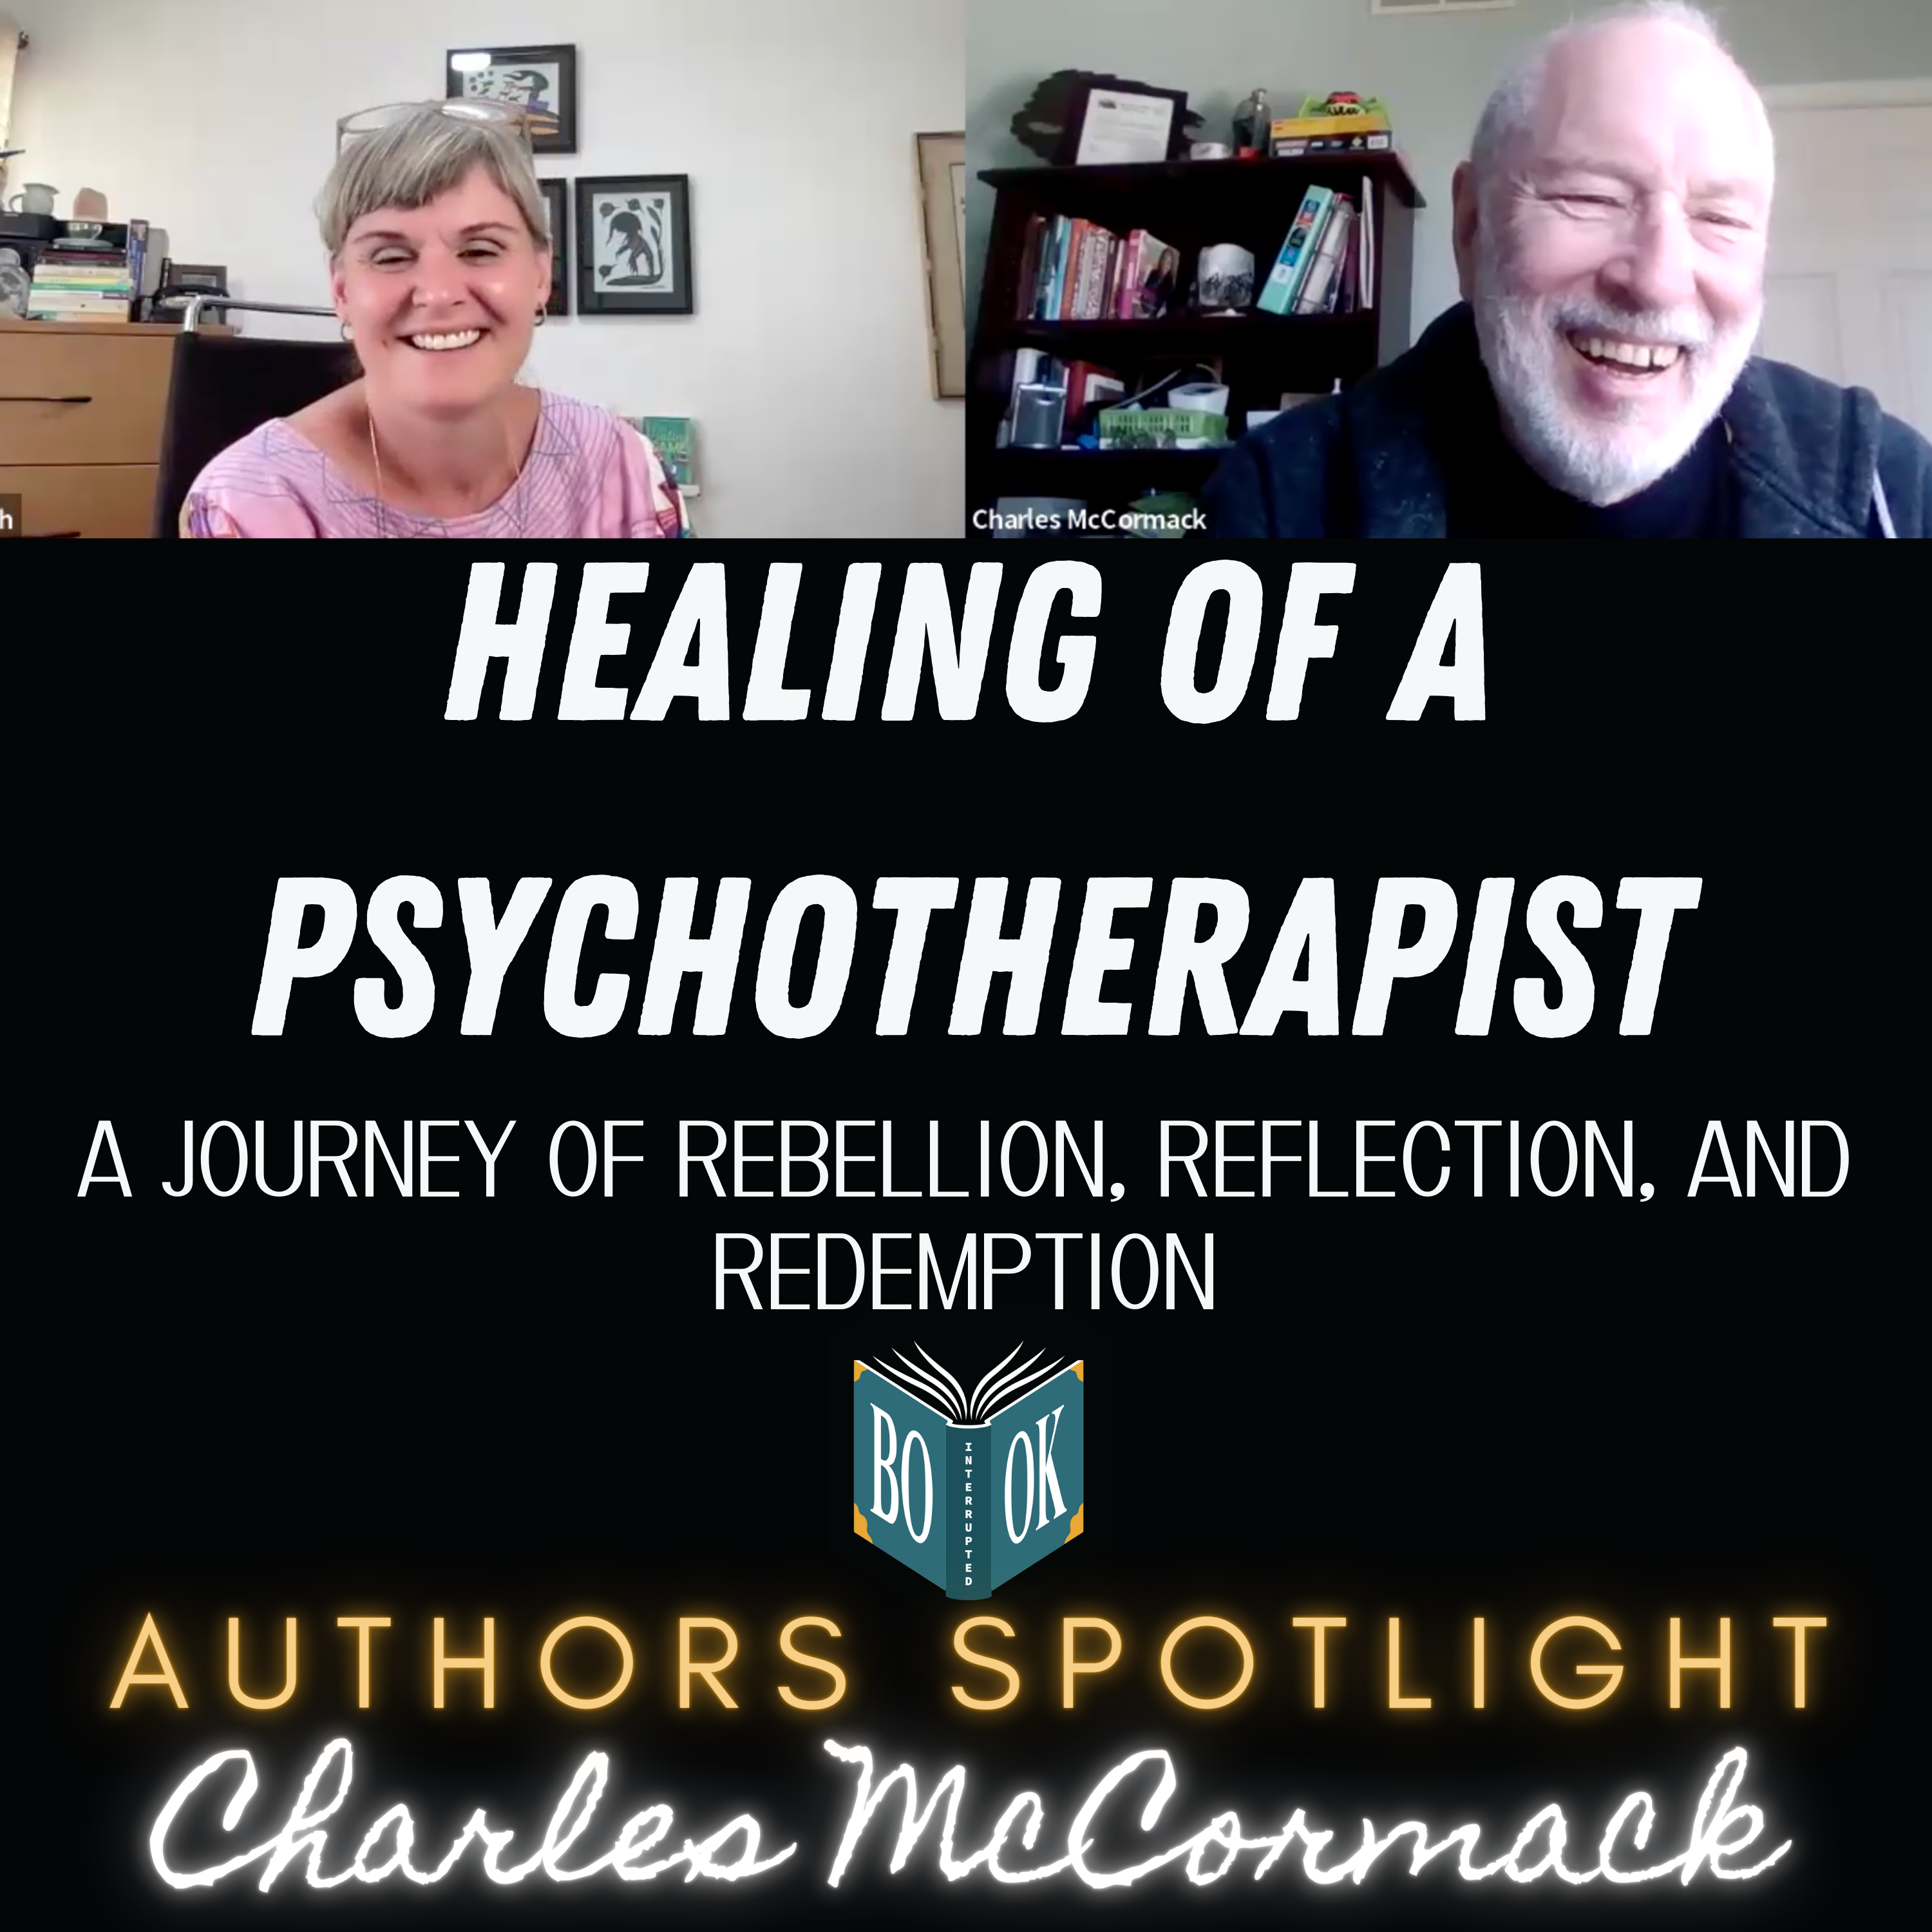 Author's Spotlight with Charles McCormack